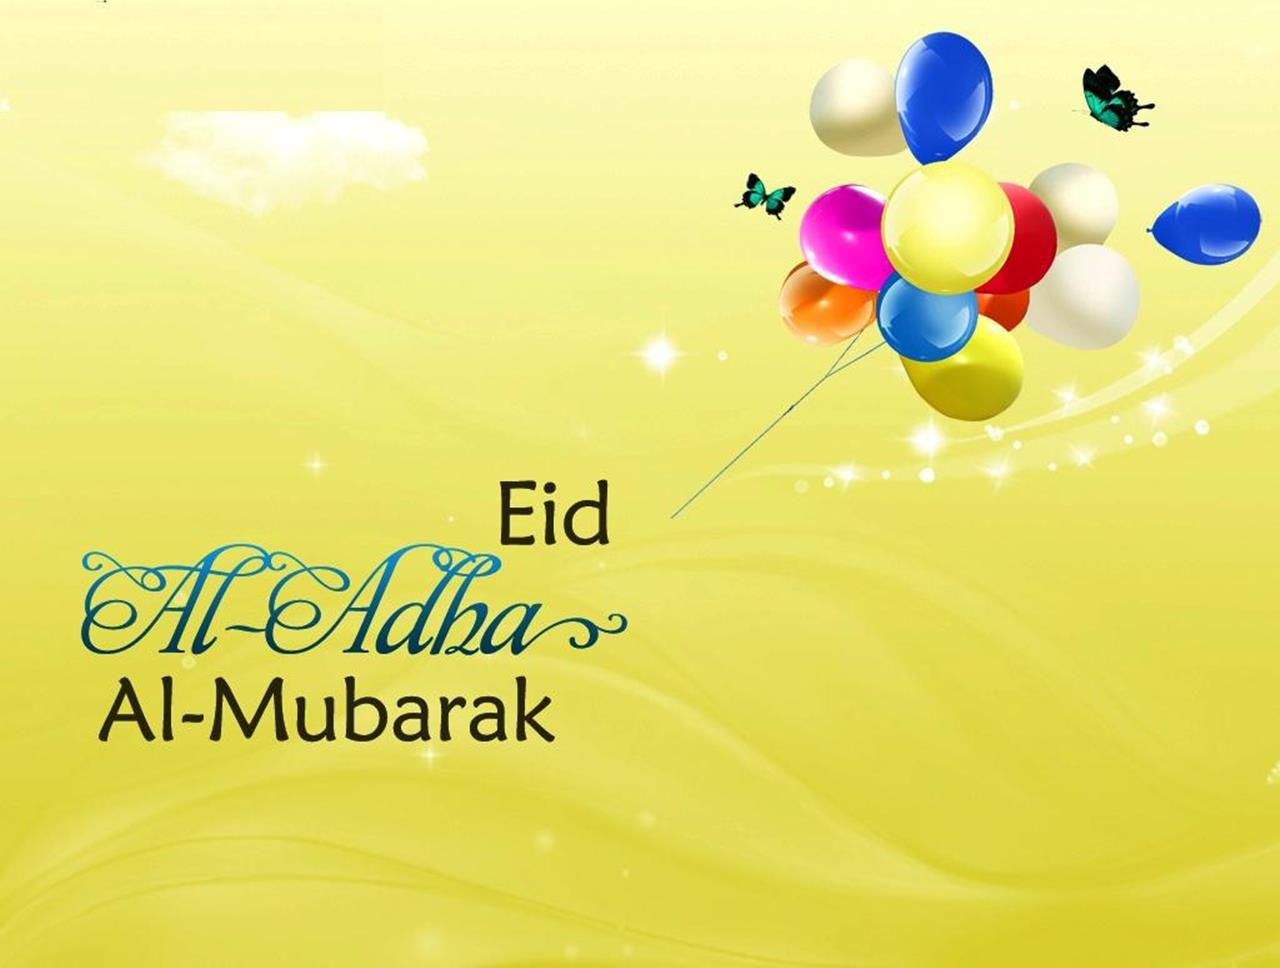 Happy EID Ul Adha Wallpapers - New Greeting Cards 2014 ...